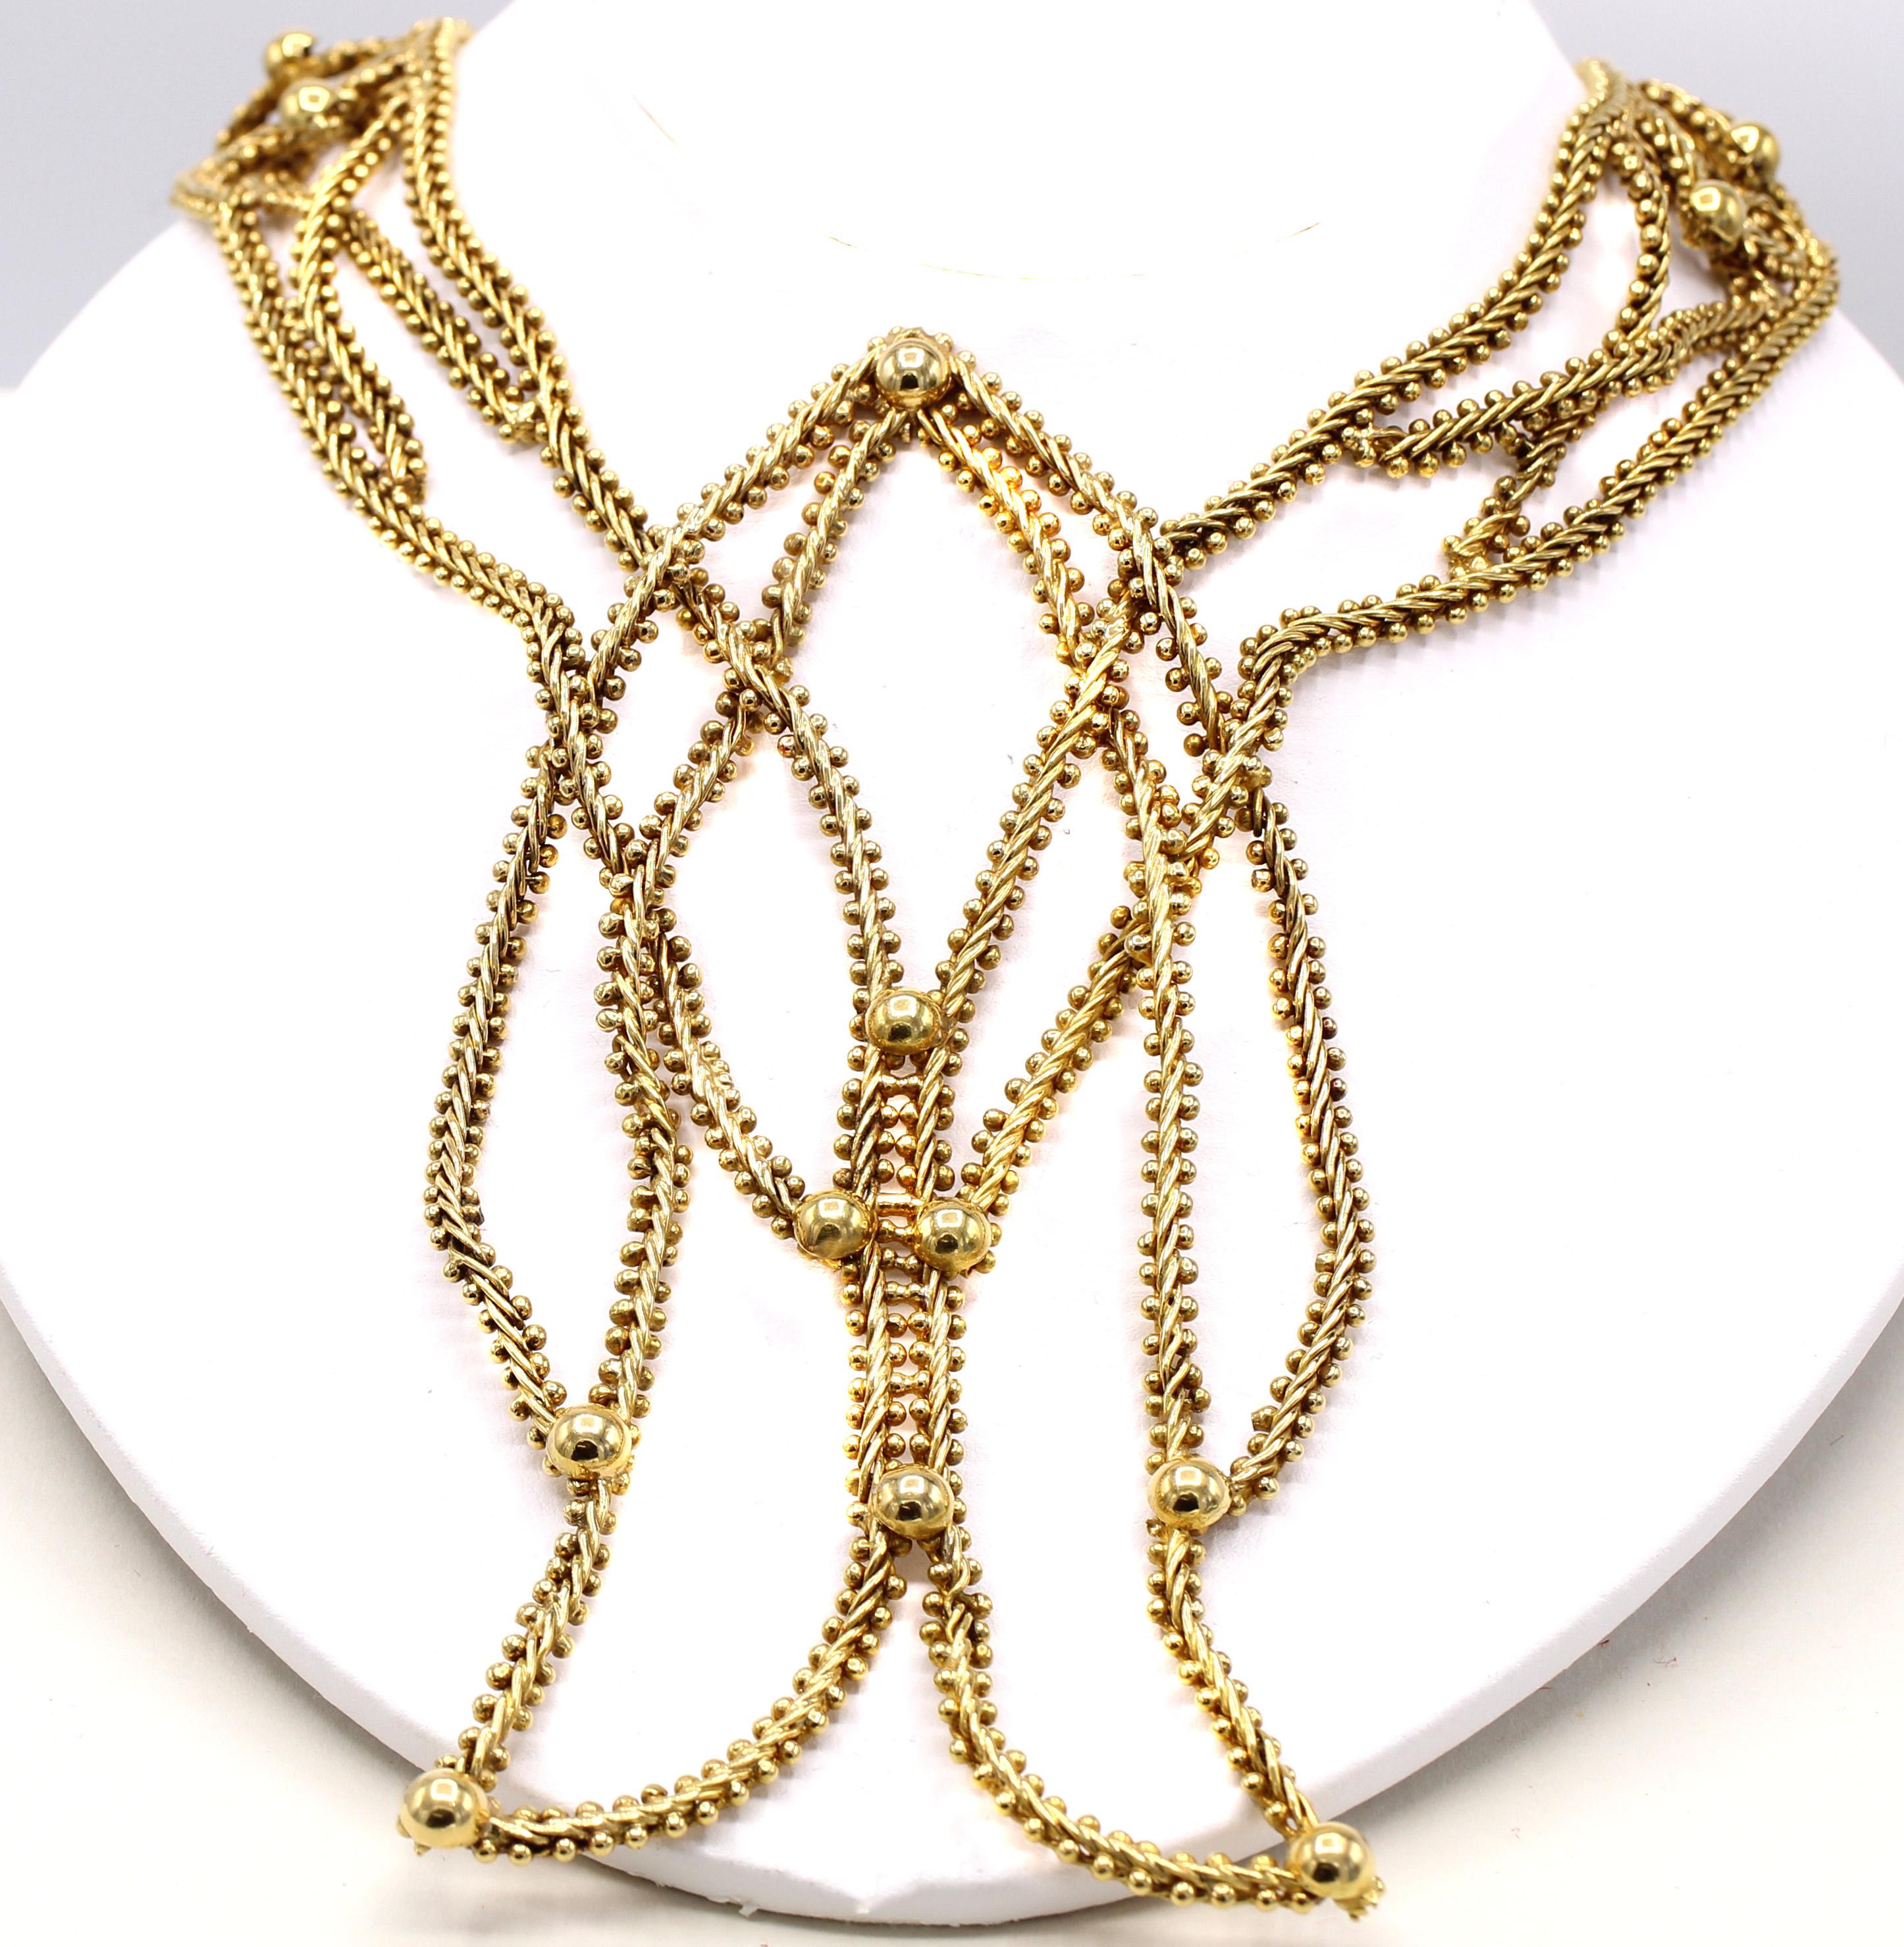 Lalaounis Iconic 18 Karat Yellow Gold Fish 1960s Necklace For Sale 1